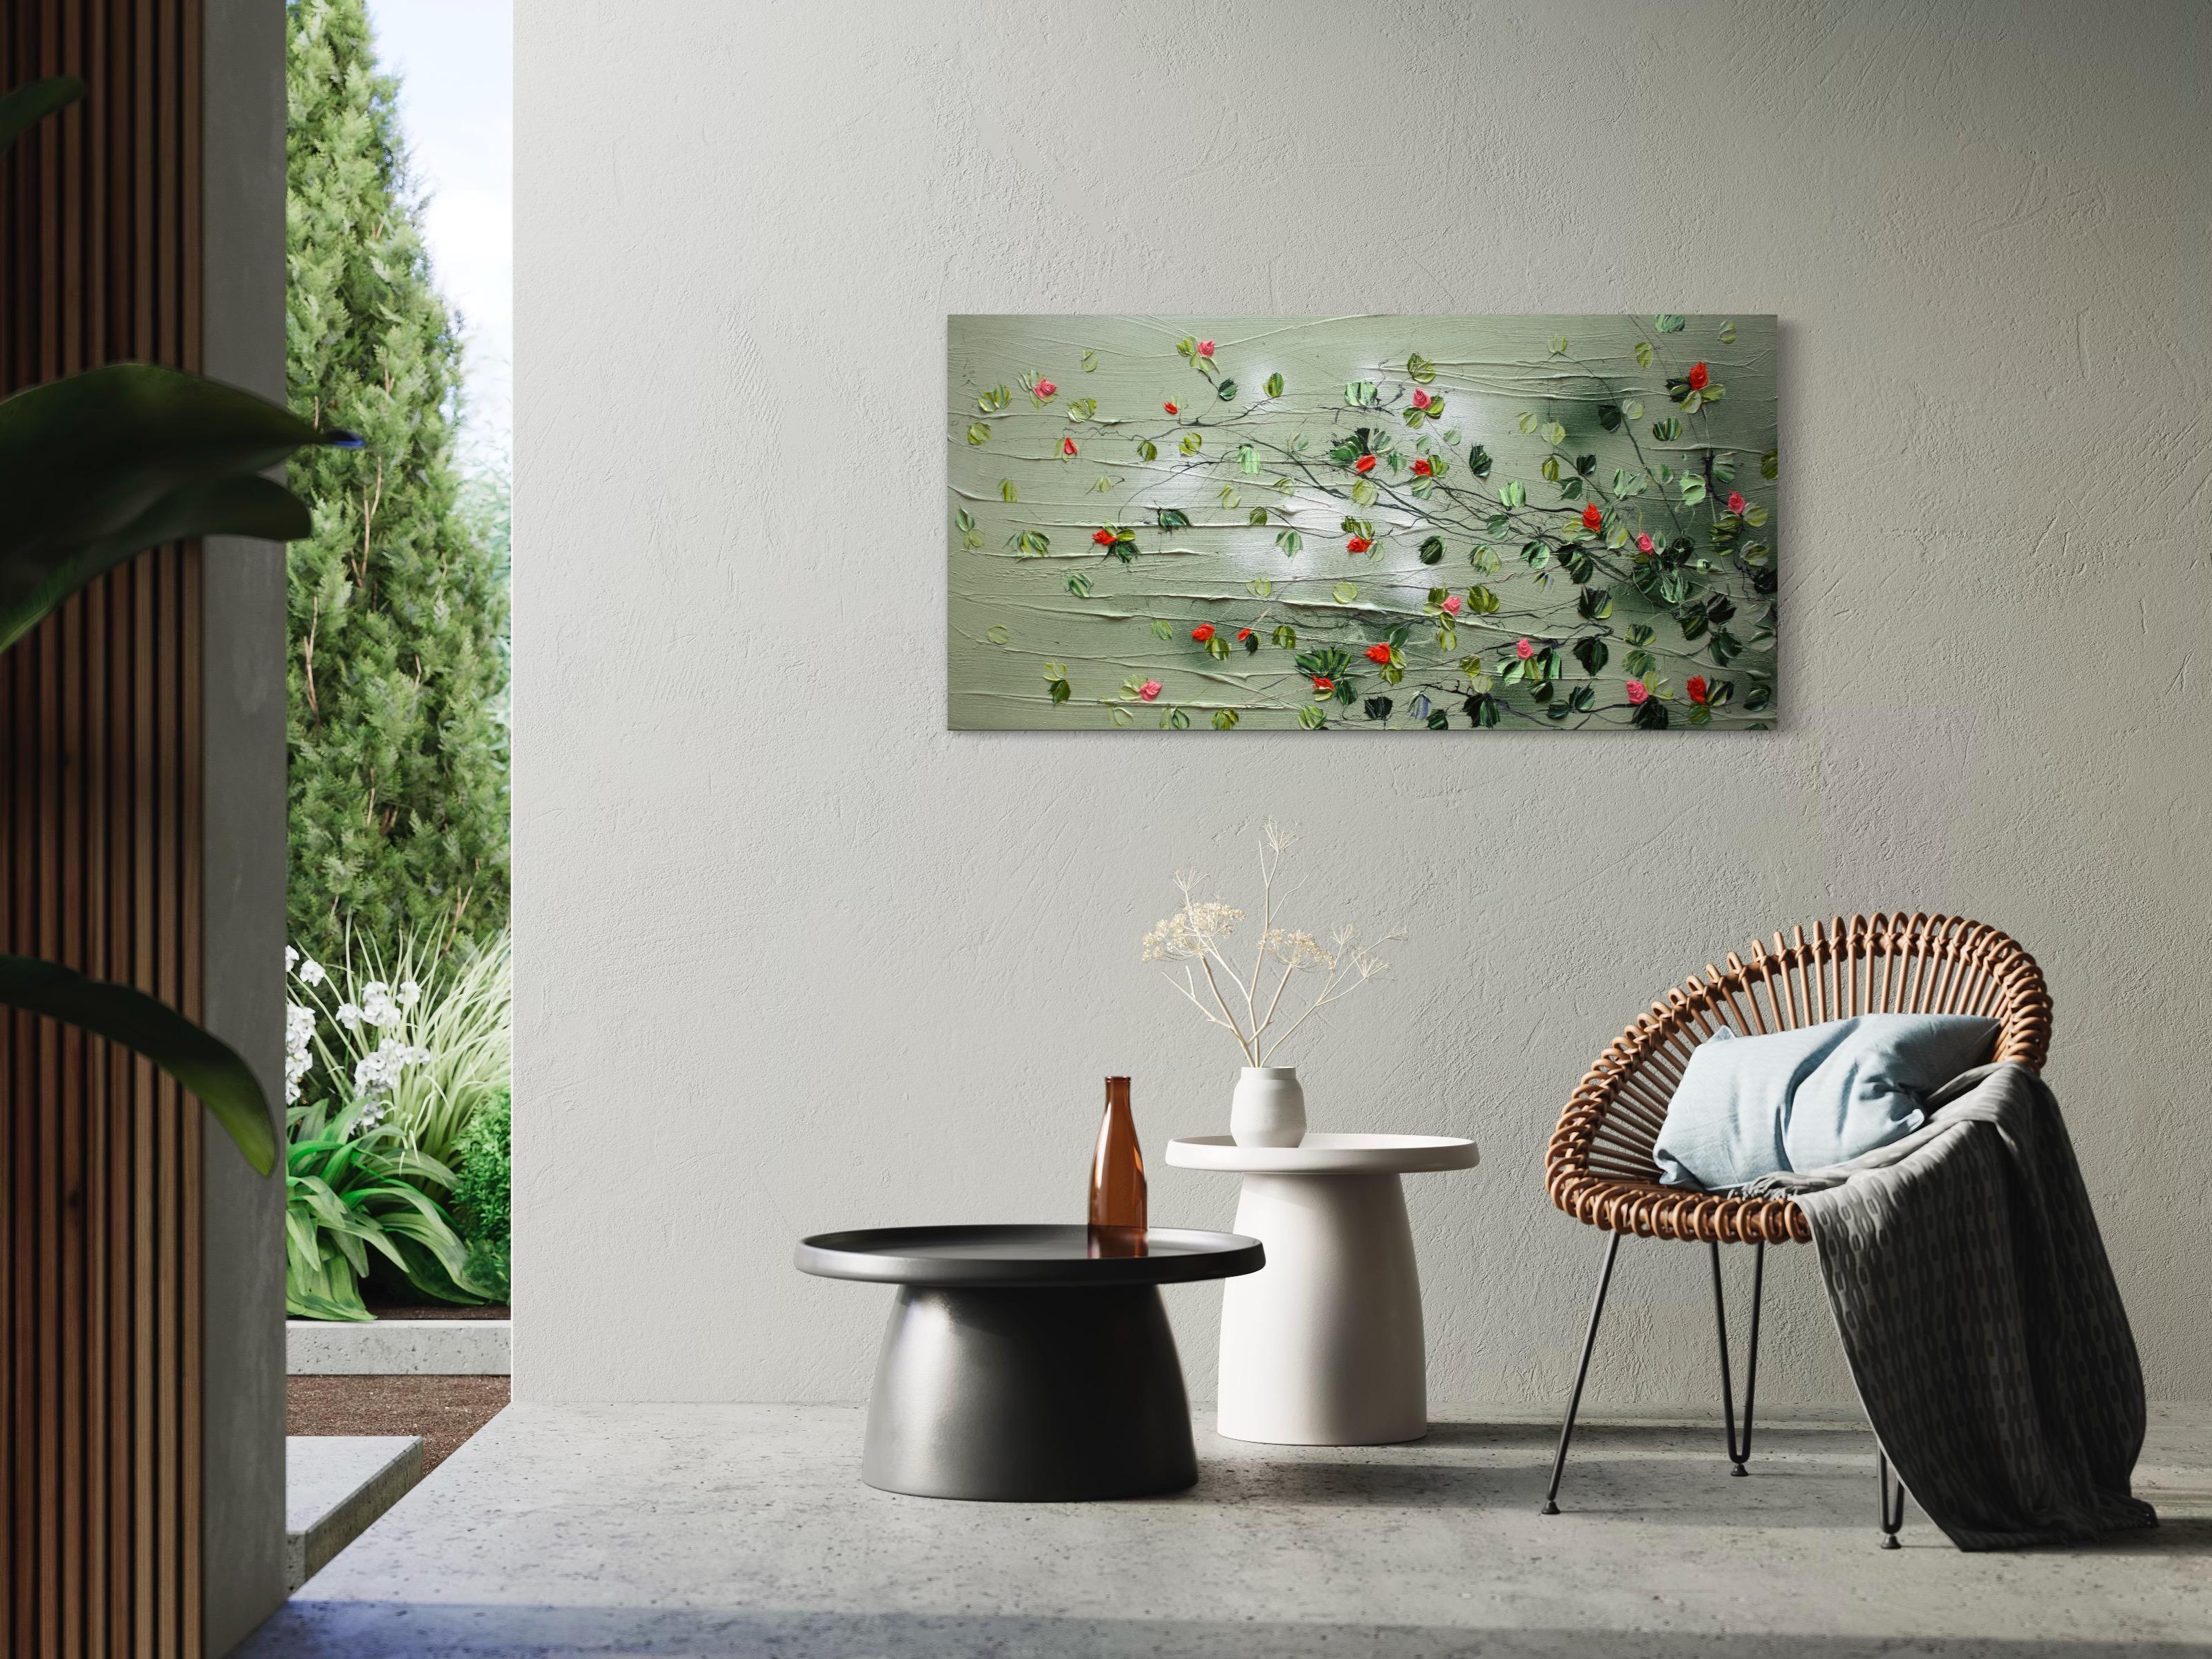 Abstract textured acrylic painting on canvas 120x60x4 cm (47,2 x 23,6 x 1,7 inches).. Mixed Media on gallery wrapped canvas. The work is ready to hang. No framing required. The sides of the work are painted.
The artwork is signed, dated and titled.